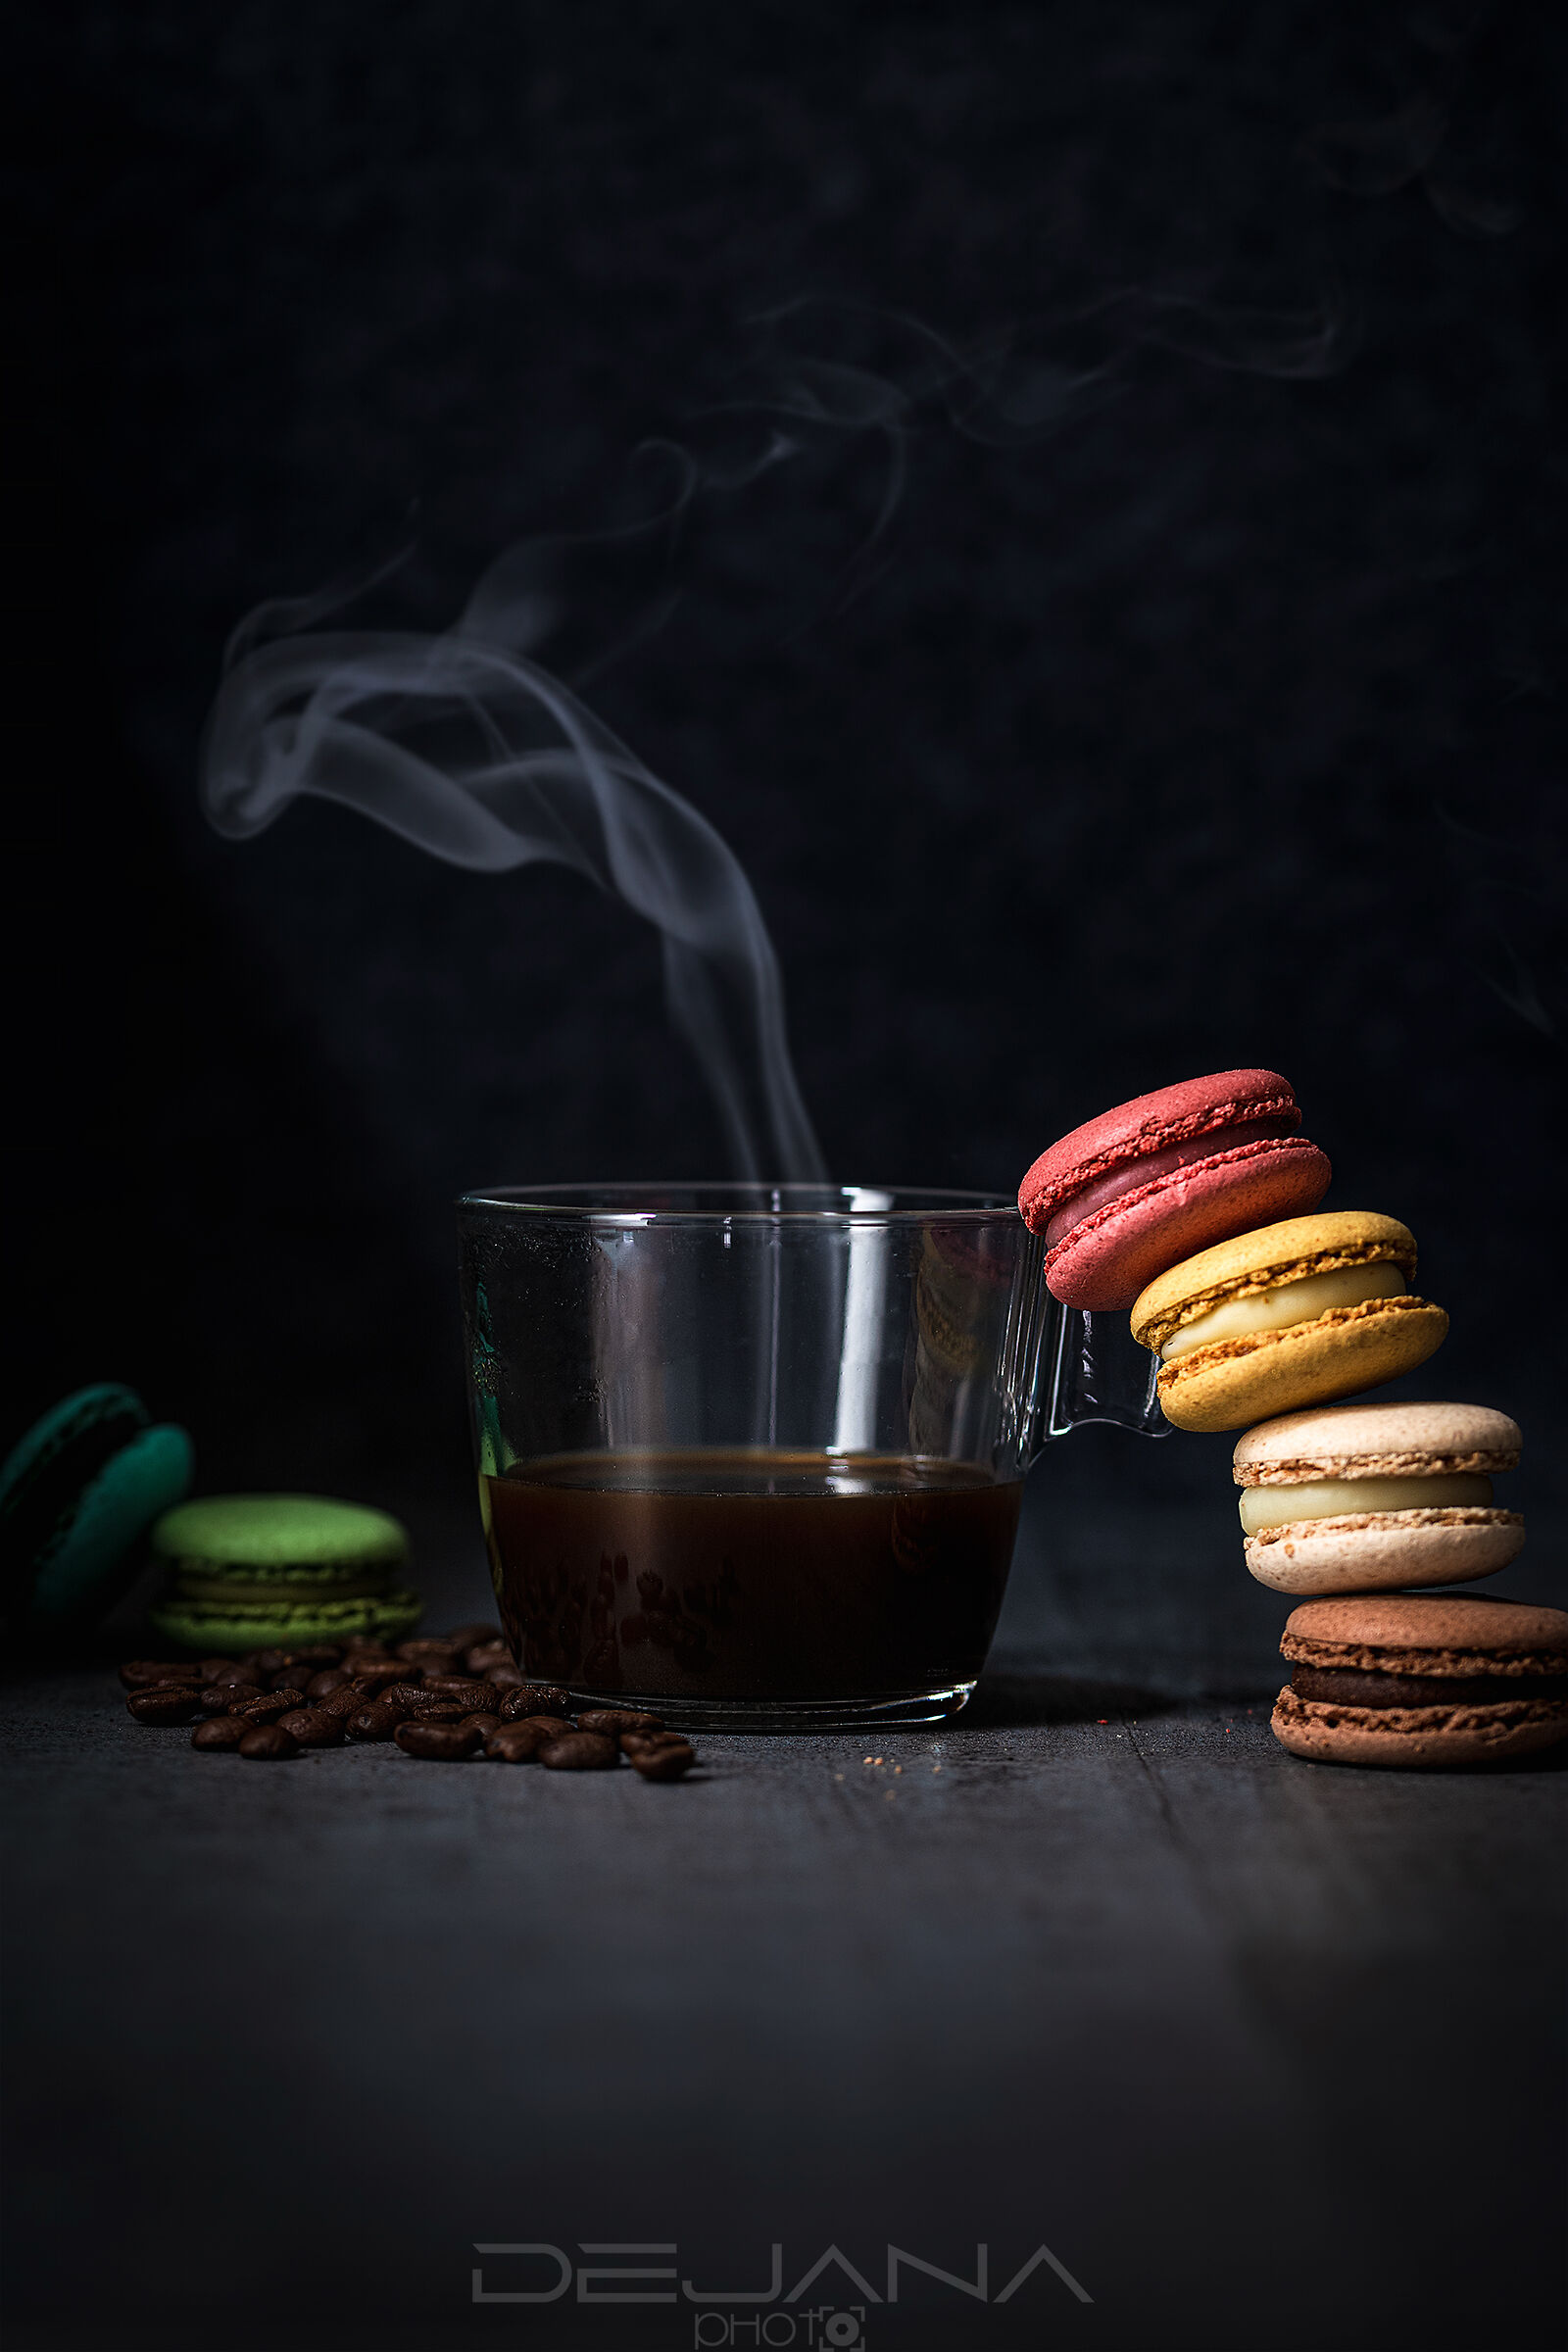 It's time for a good coffe and some colorful macarons.....